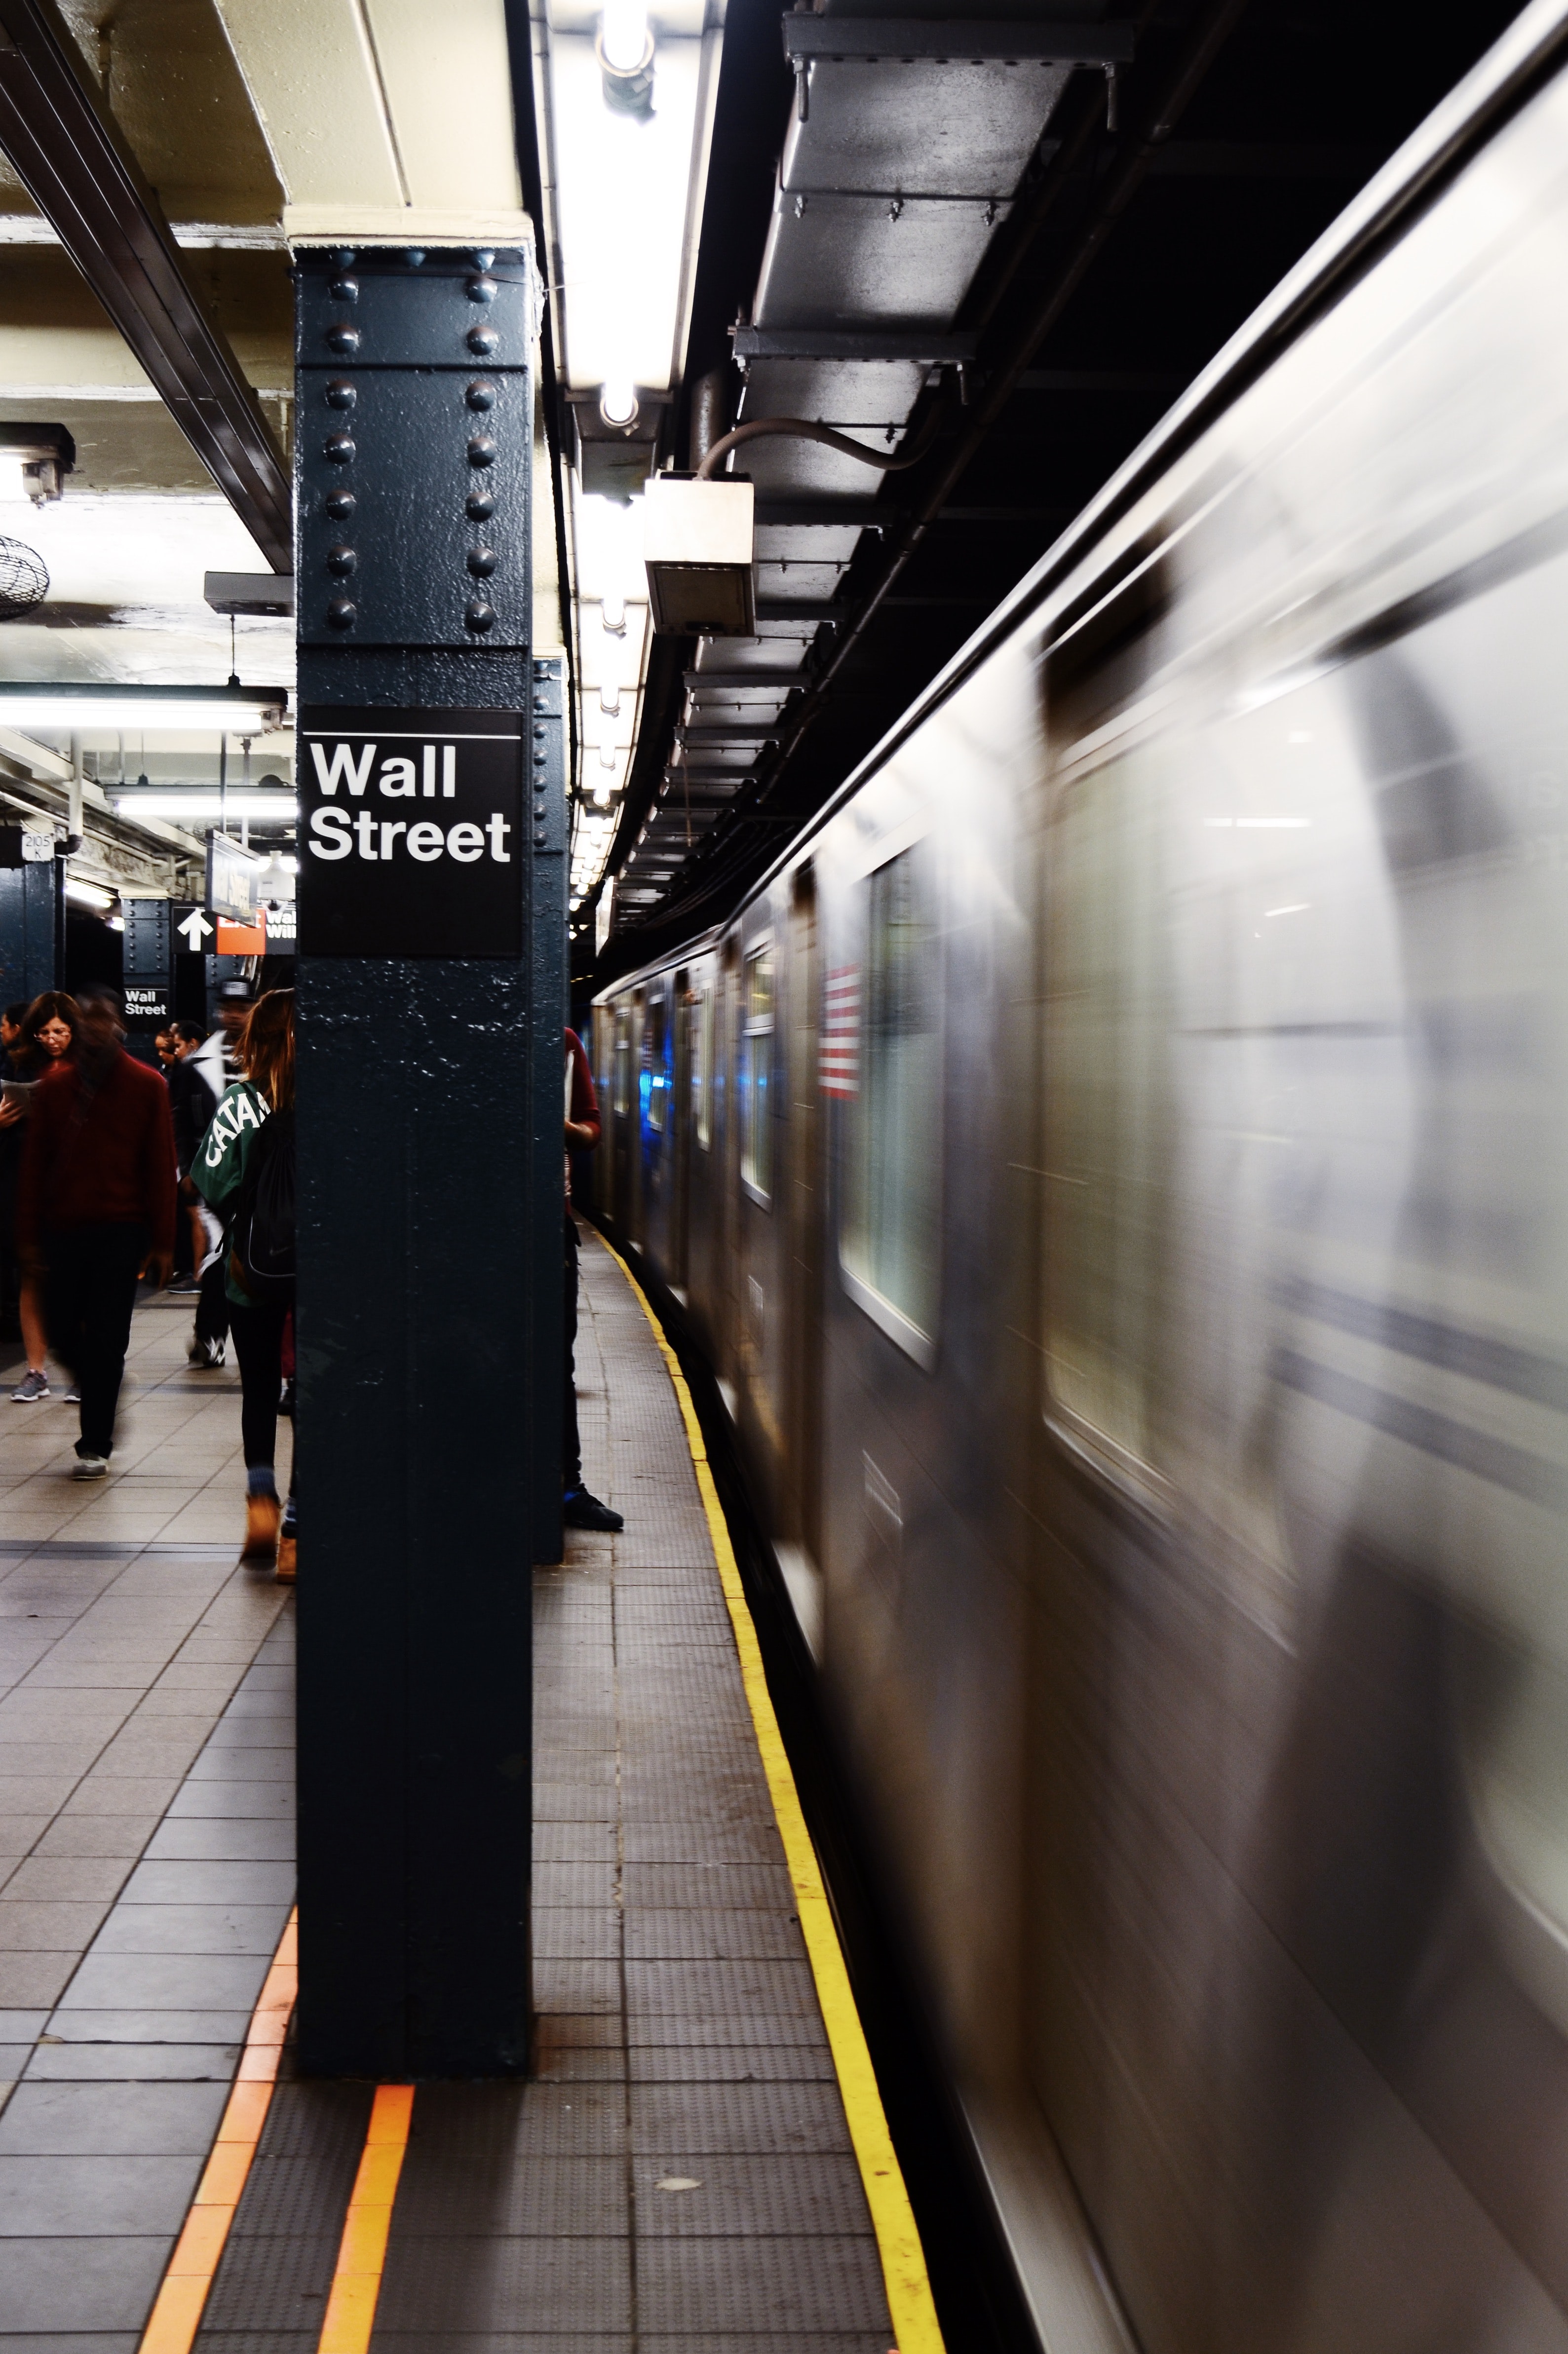 Wall Street Train Picture